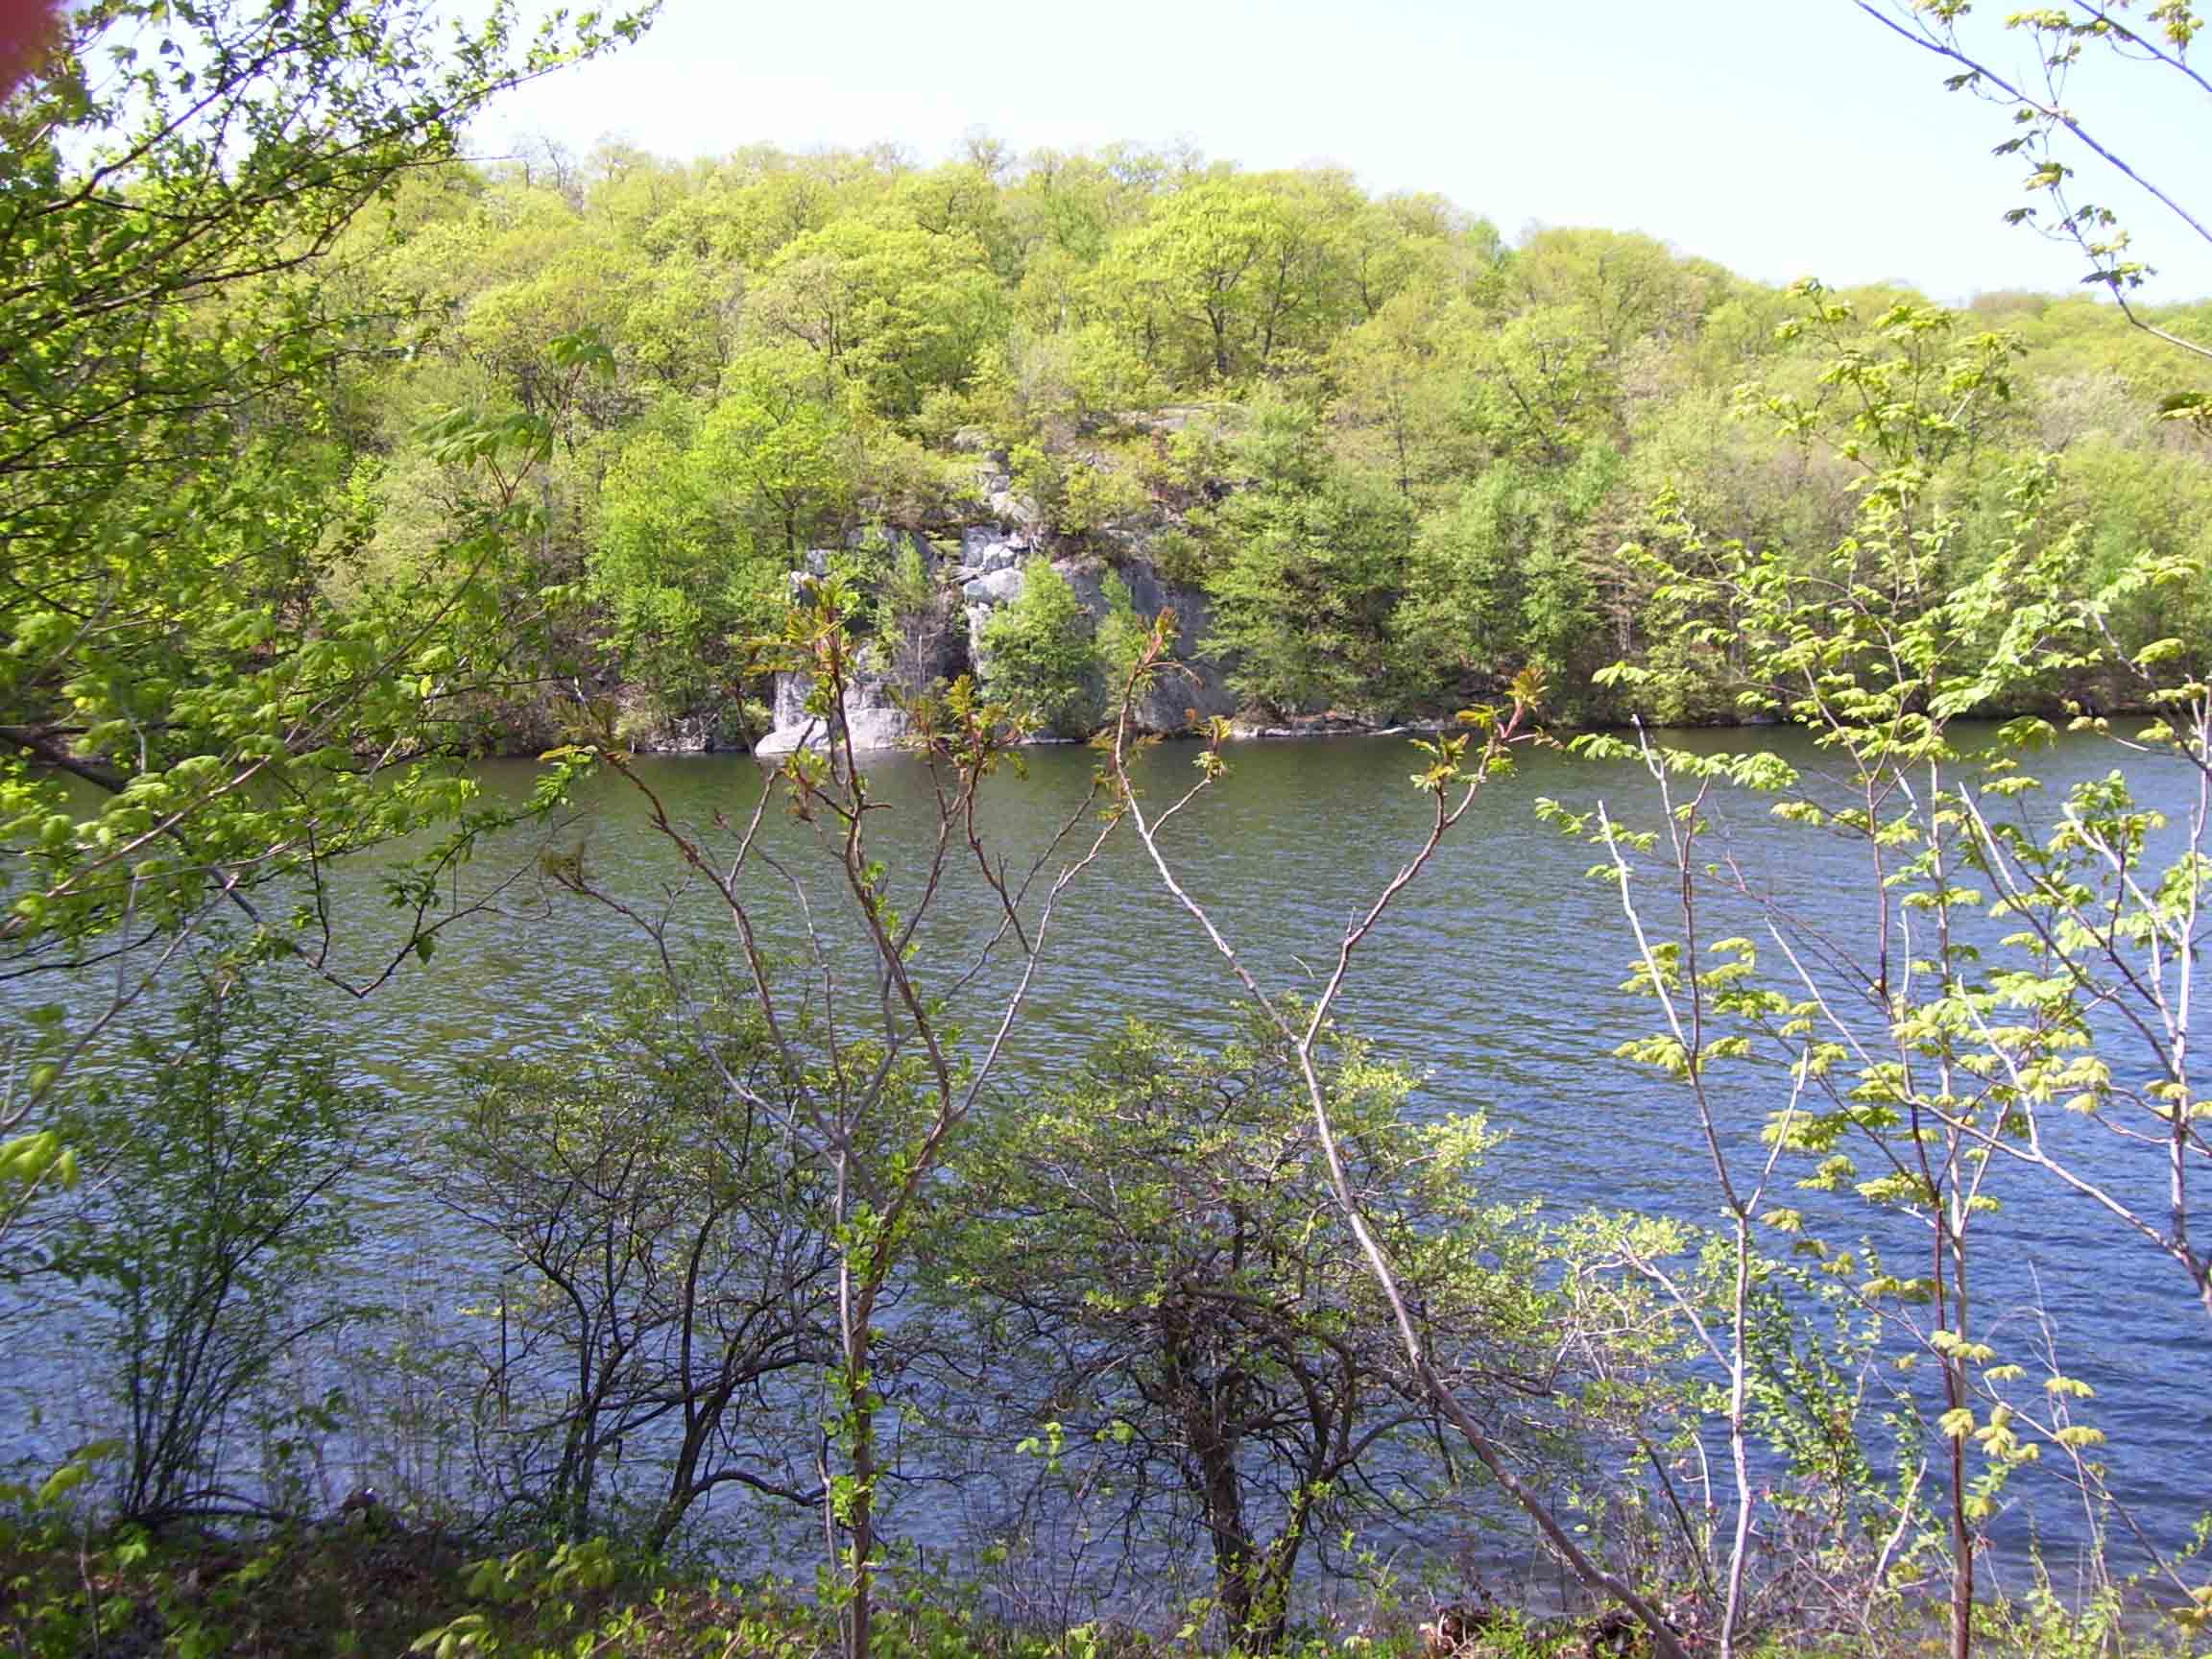 Western end of Canopus Lake taken from Rte. 301 in Fahnestock State Park. To go to more picures of Canopus Lake, see Section 7. Taken at approx. MM 7.2.   Courtesy dlcul@conncoll.edu